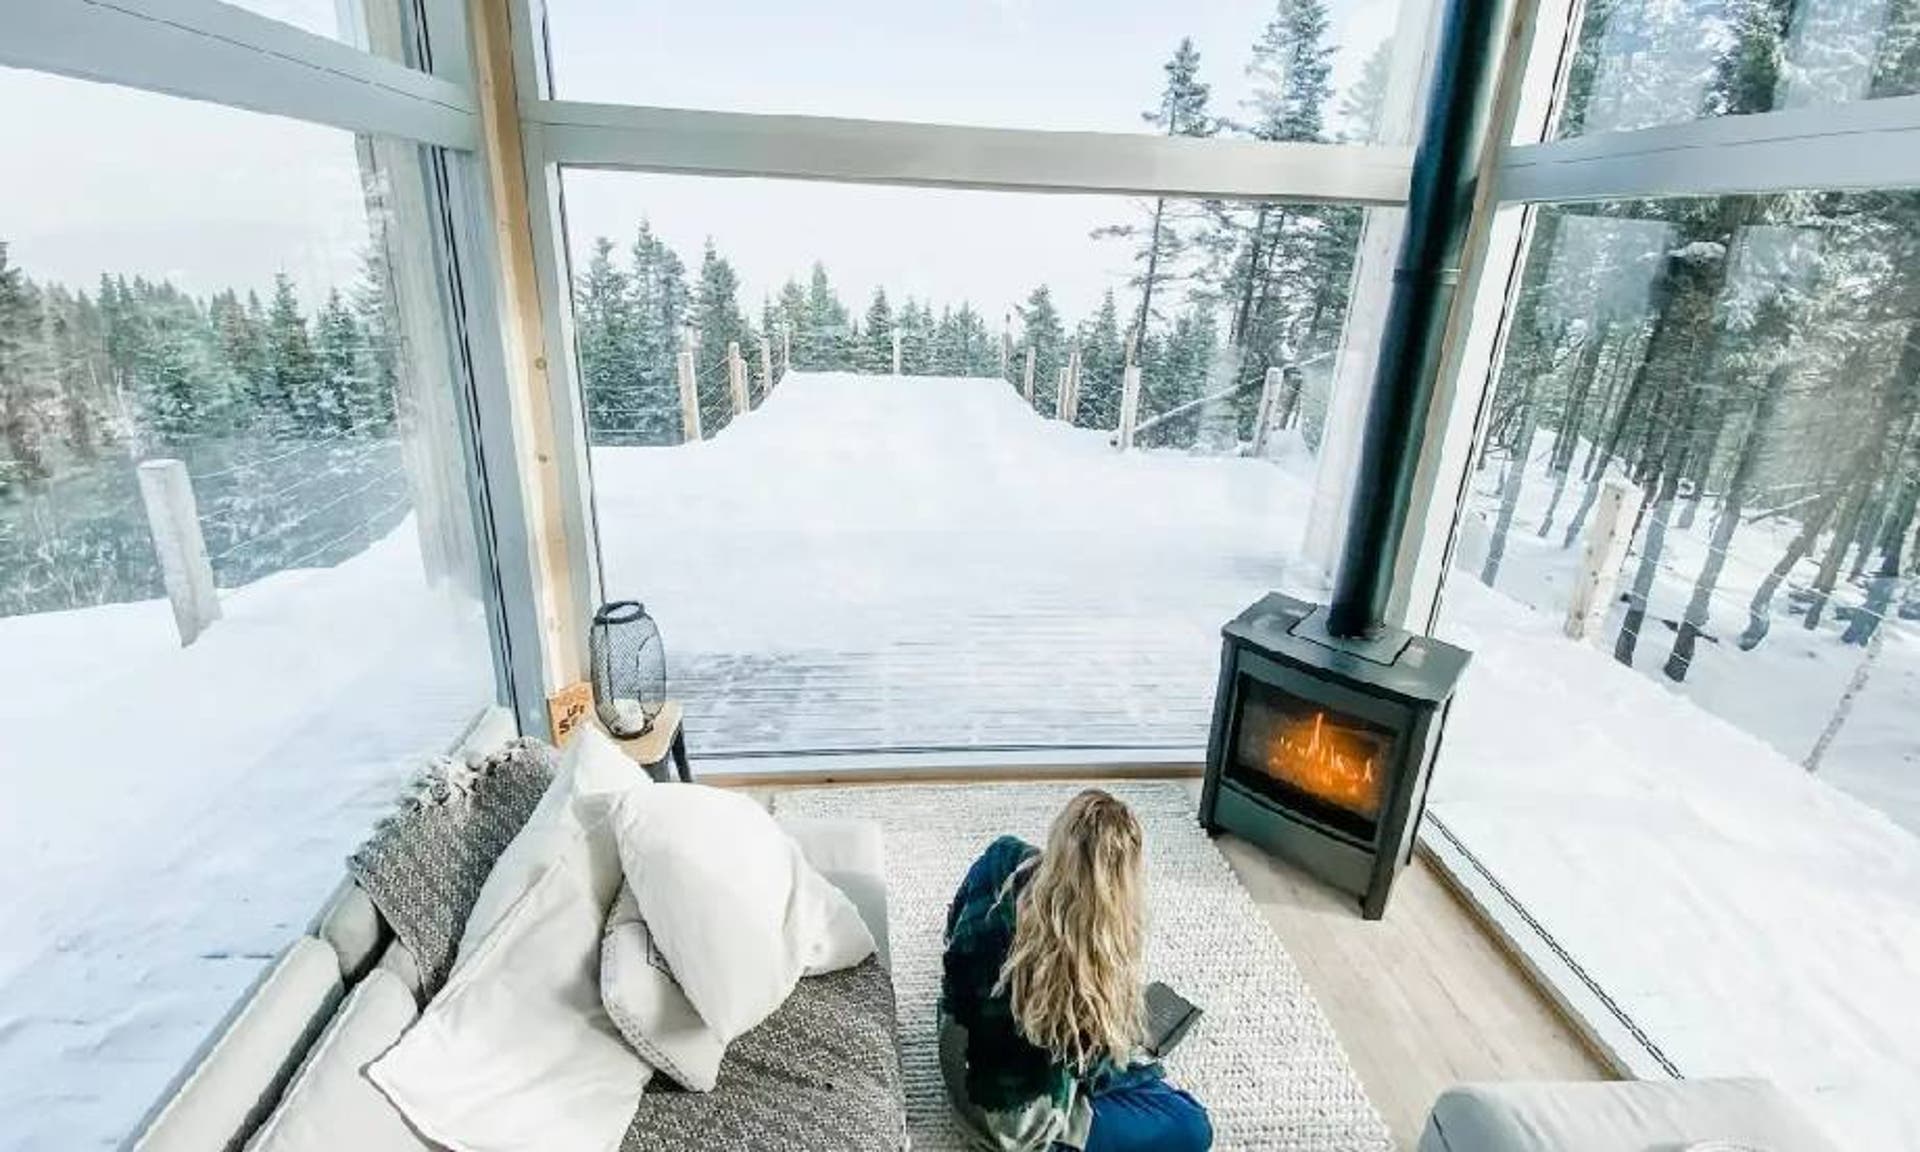  A woman sat in a glass property with a log burner, surrounded by a snowy backdrop with snow covered trees. 